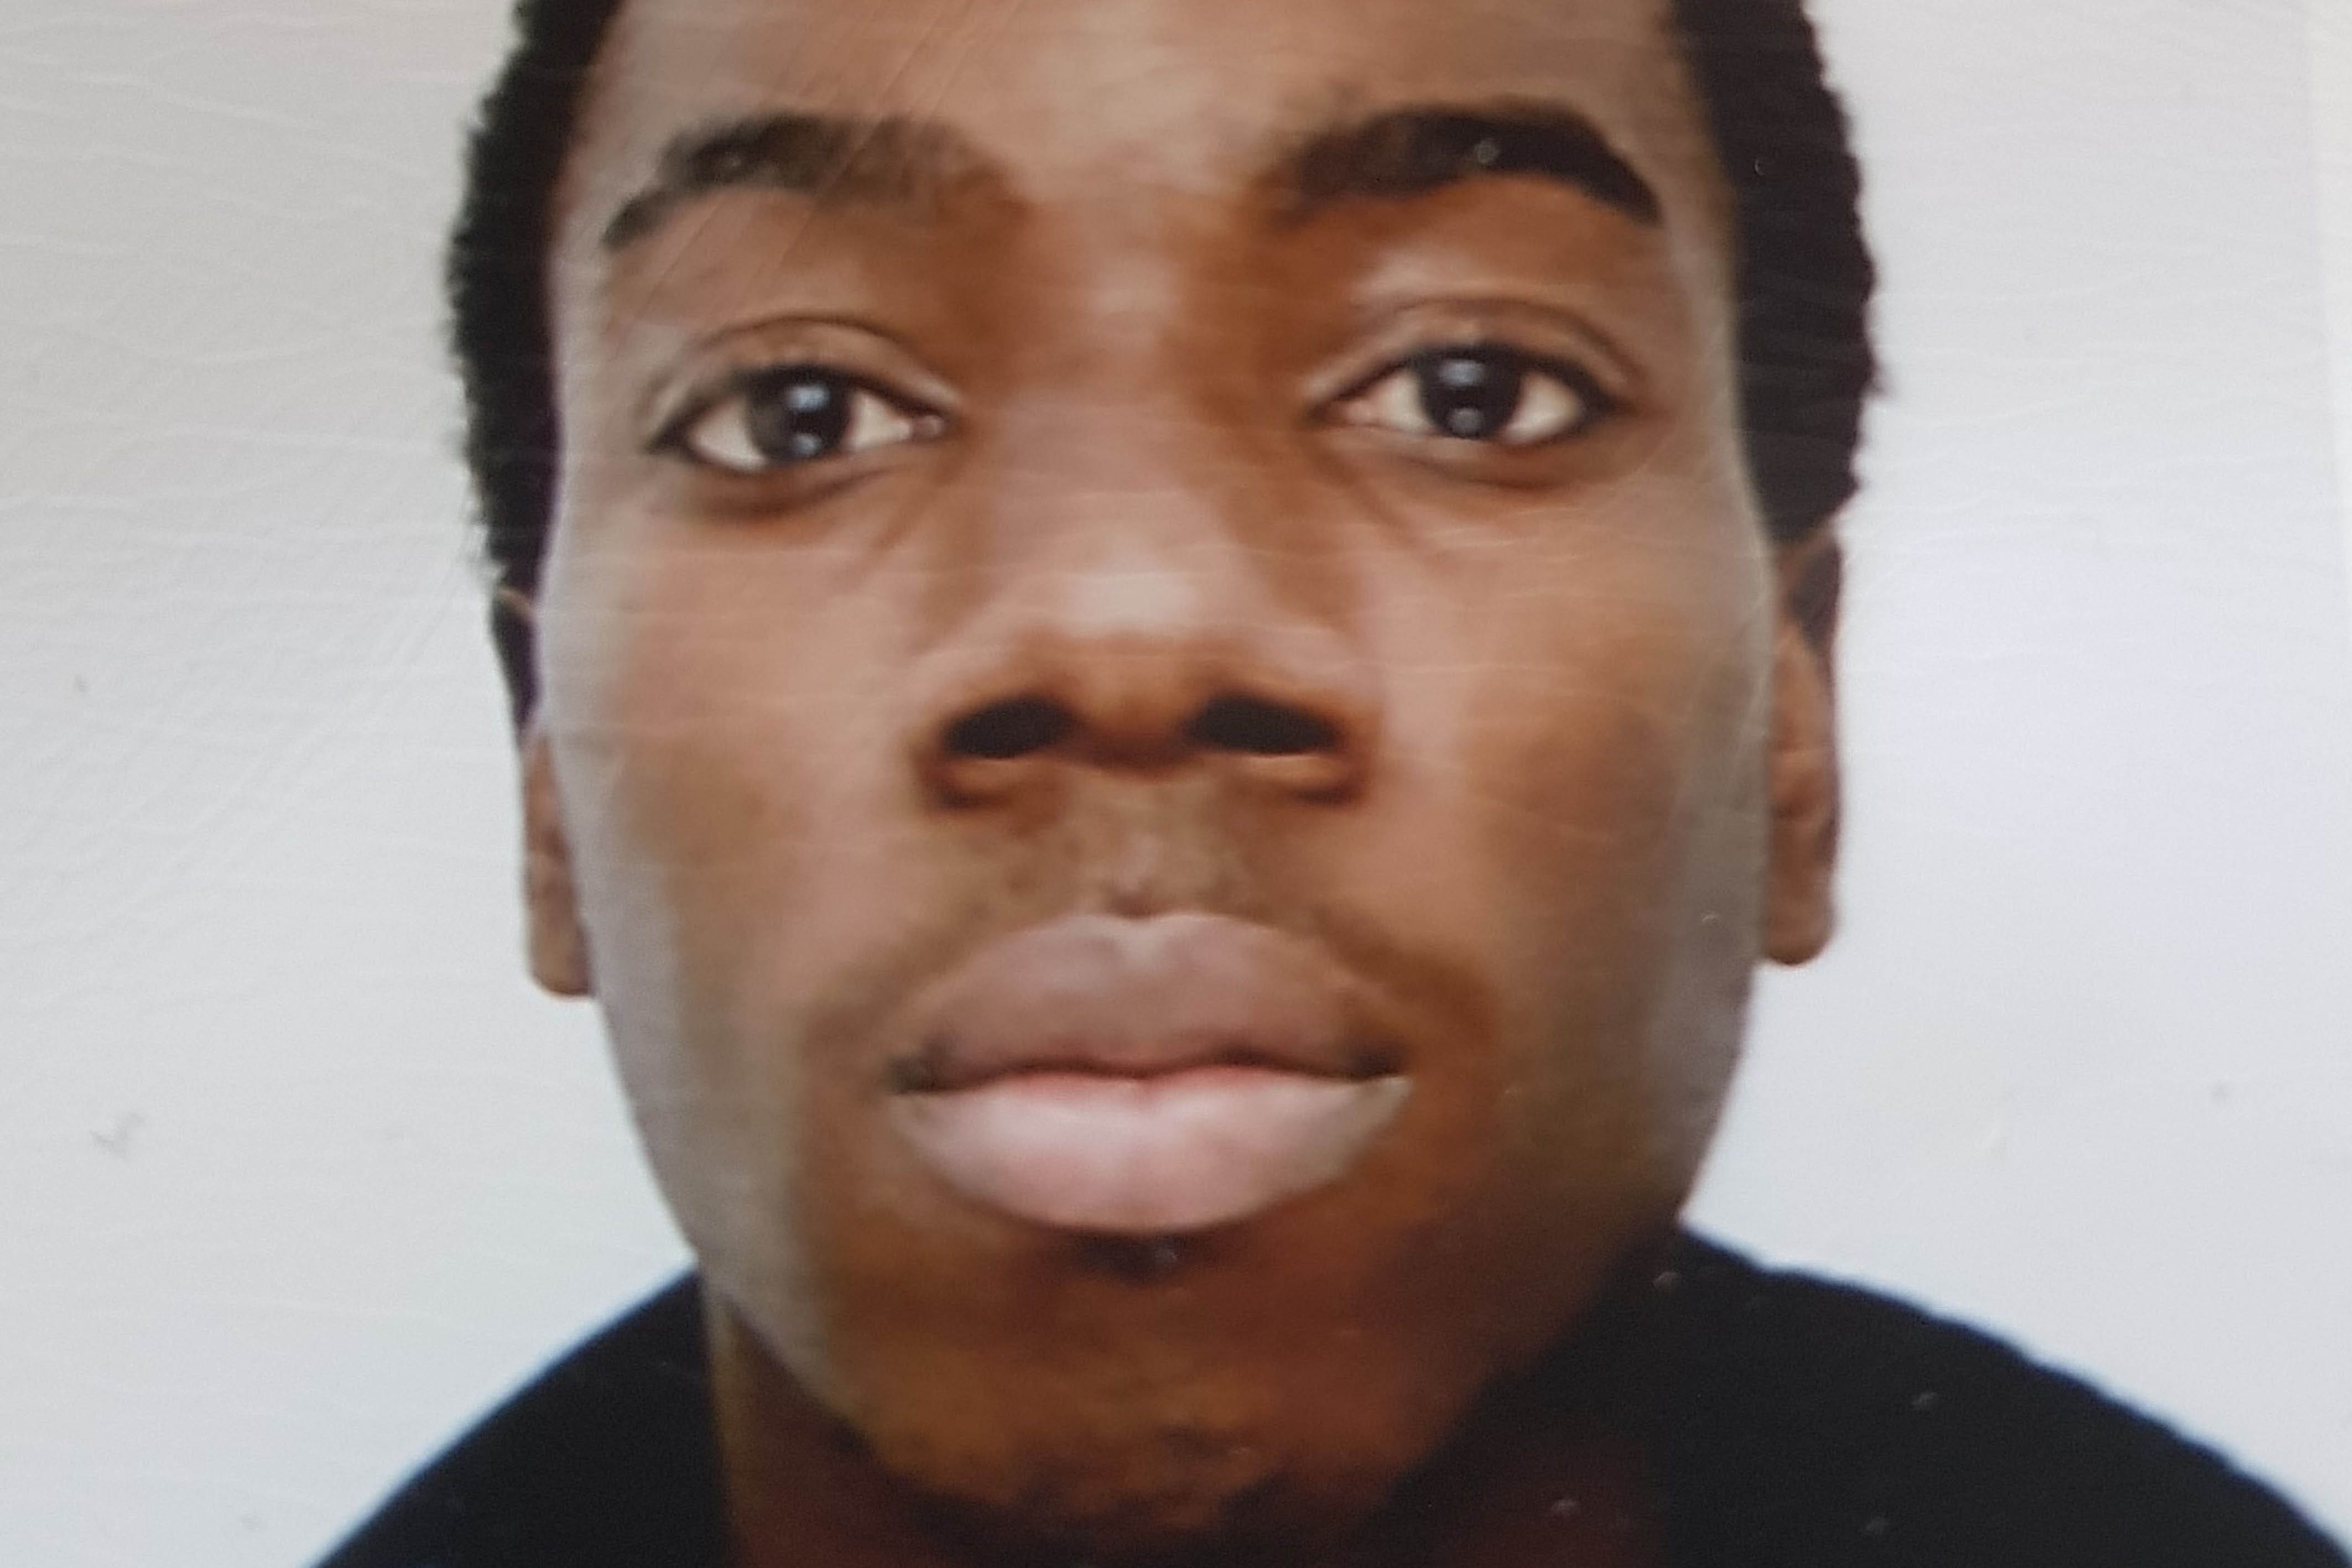 Richard Okorogheye, 19, was found in Wake Valley Pond in Essex on April 5 2021, two weeks after he was reported missing